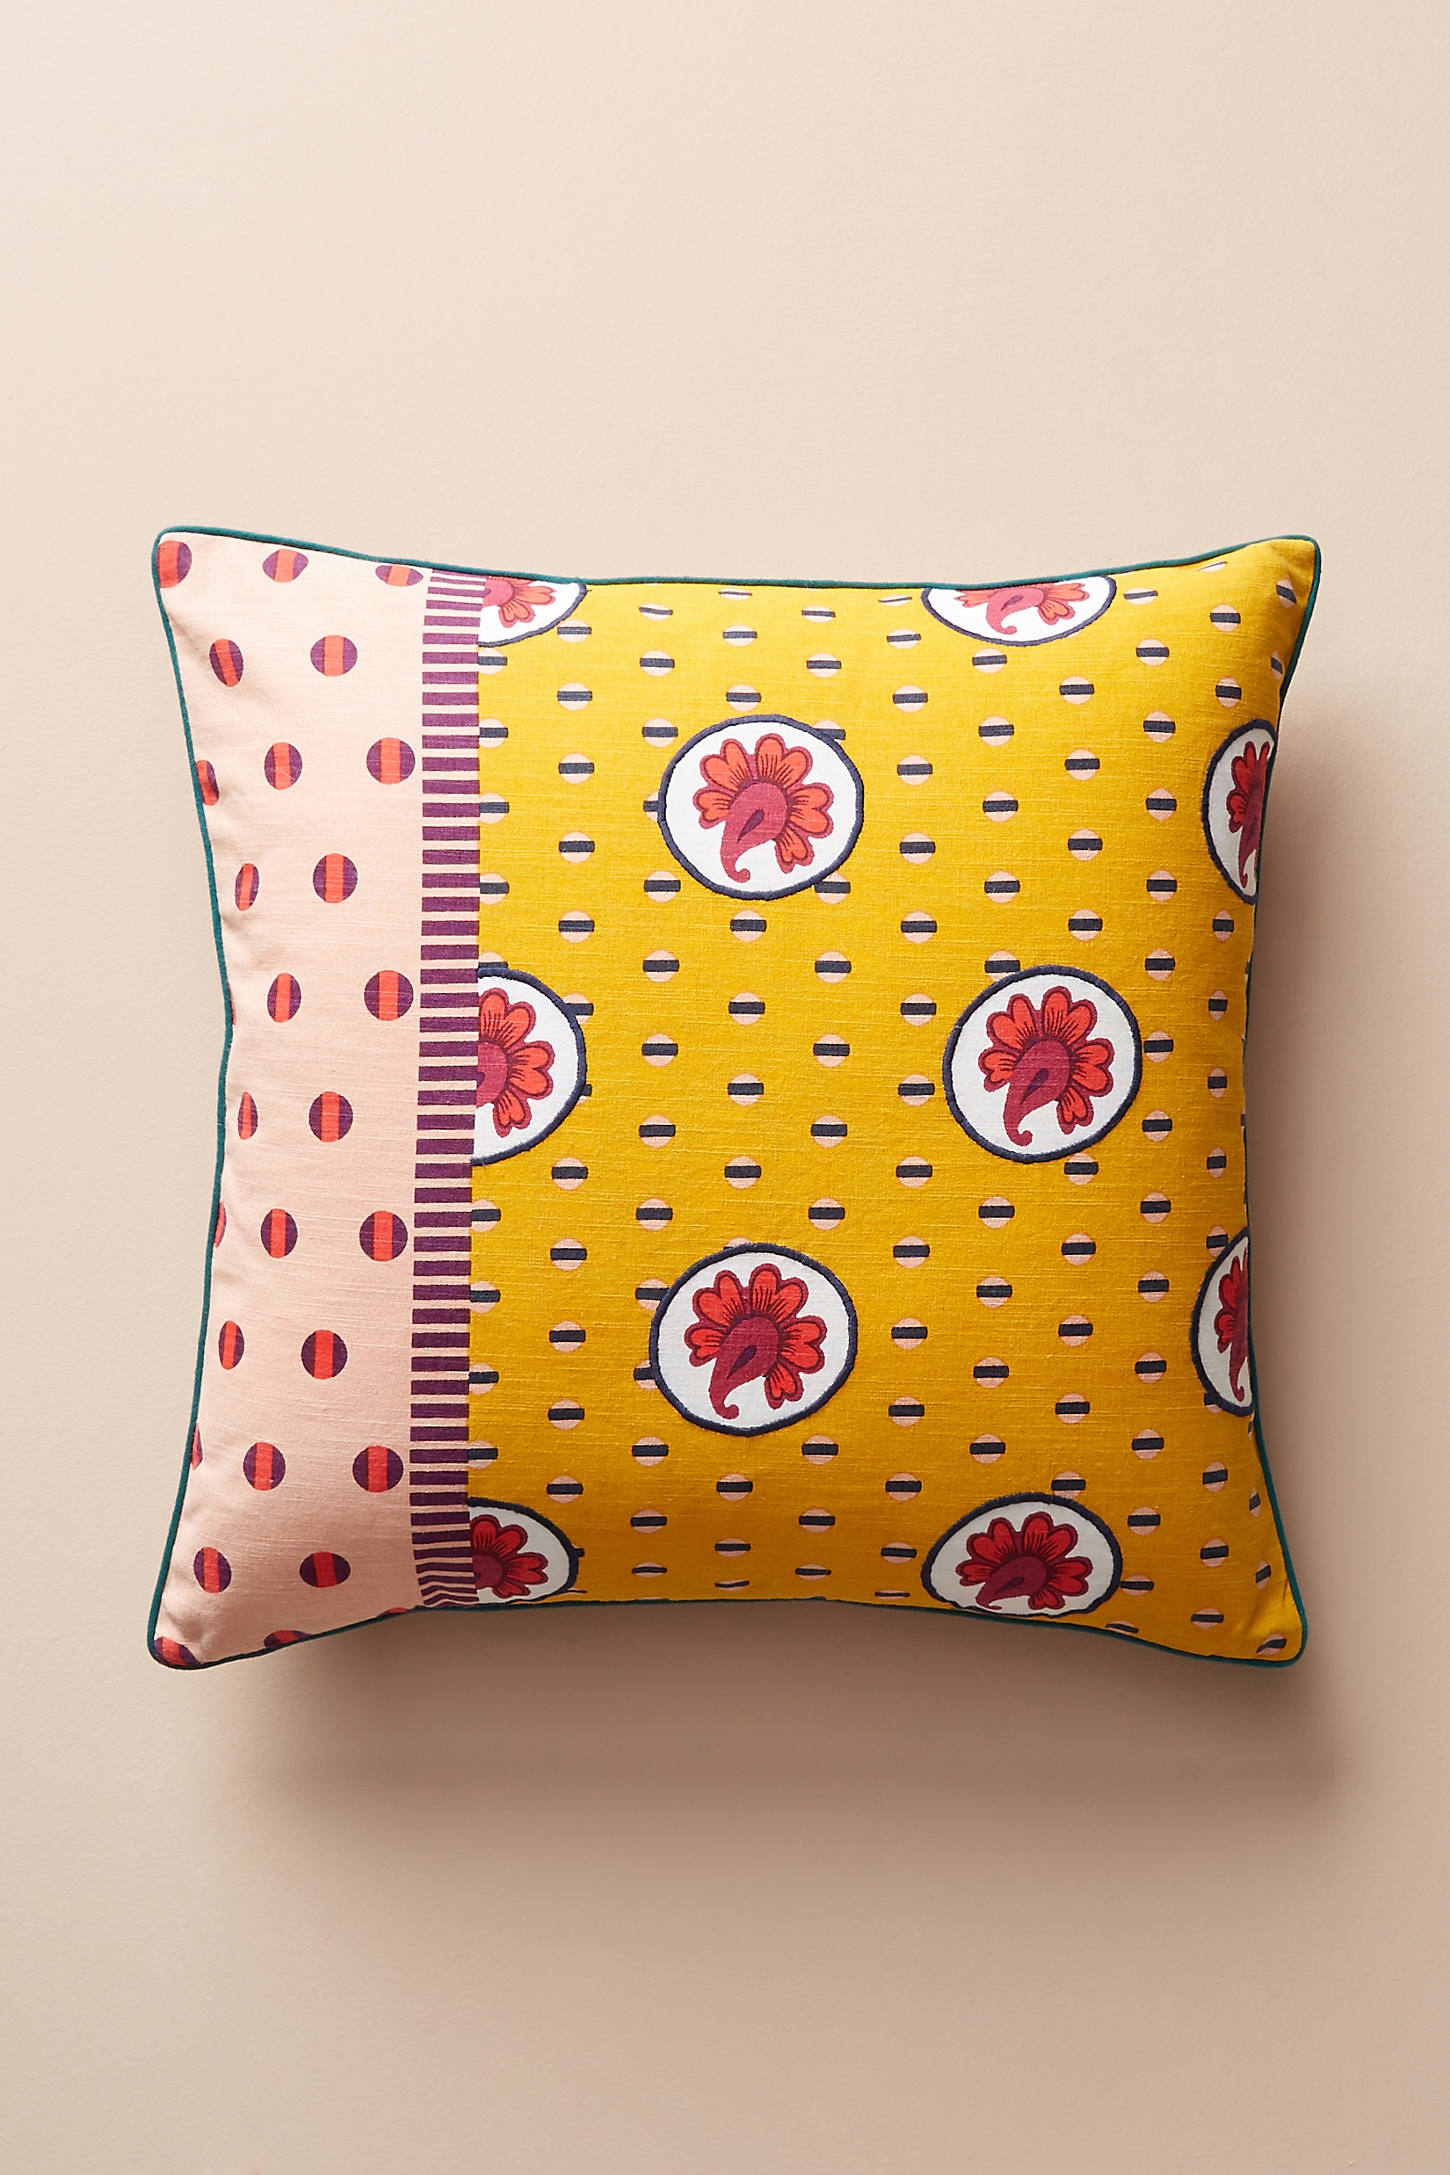 SUNO for Anthropologie Pillow - Image 0